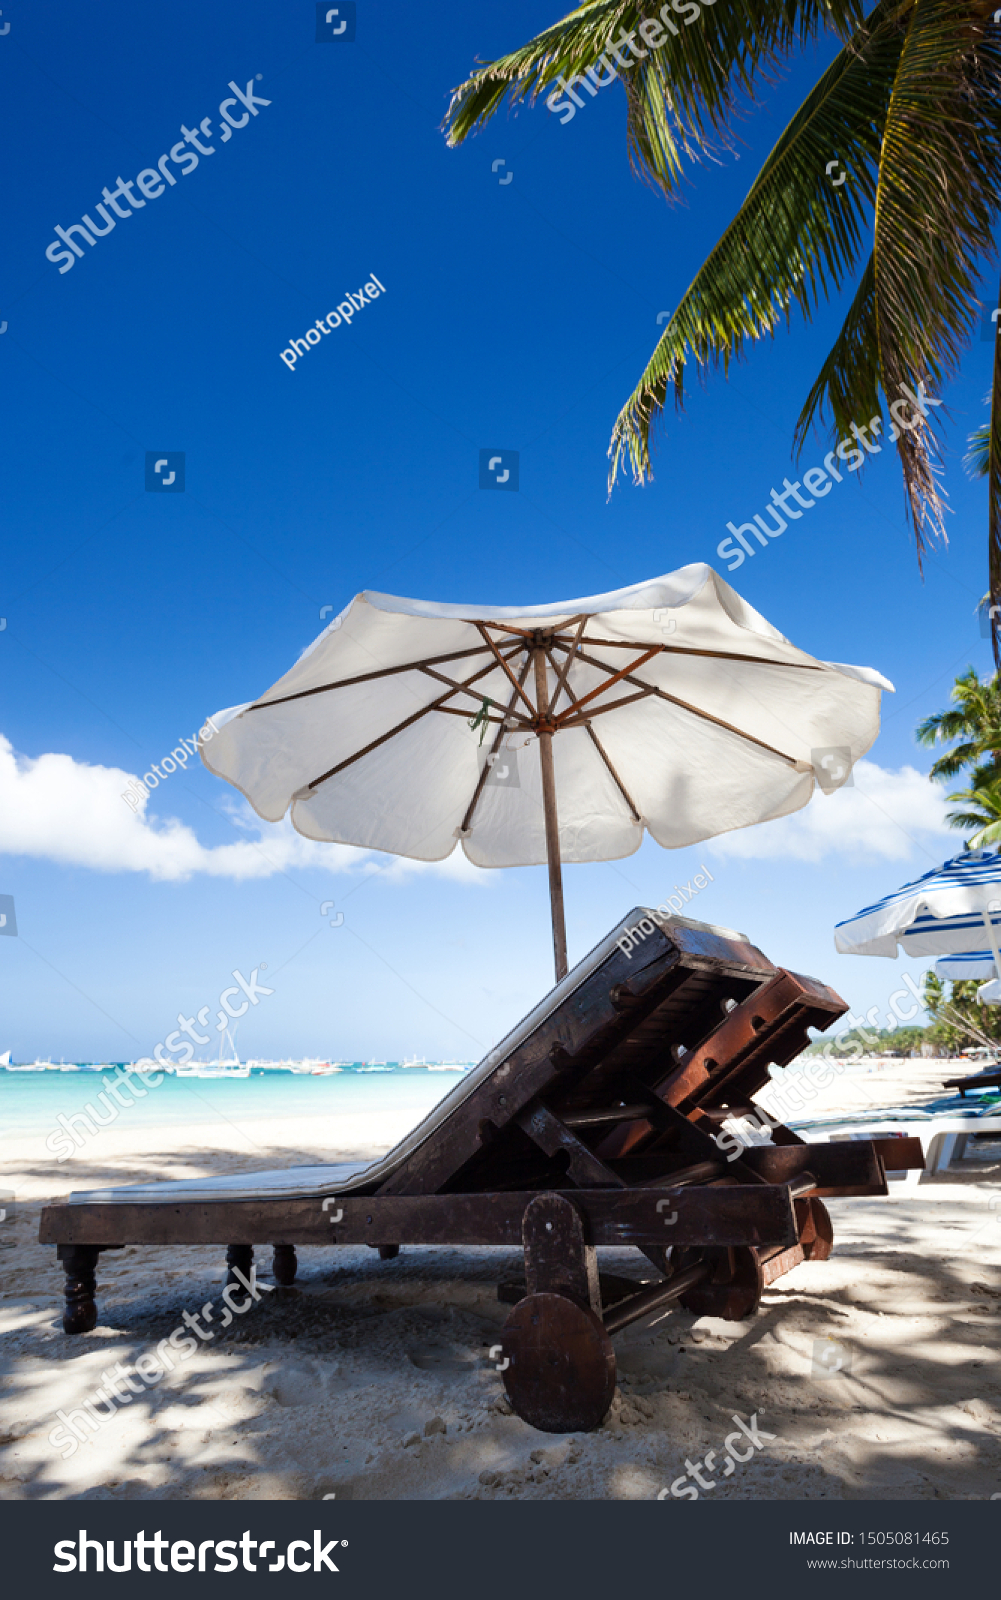 Sun umbrella and sunlongers on sandy tropical beach with white sand and turquoise sea water. Travel destinations. Summer vacations #1505081465